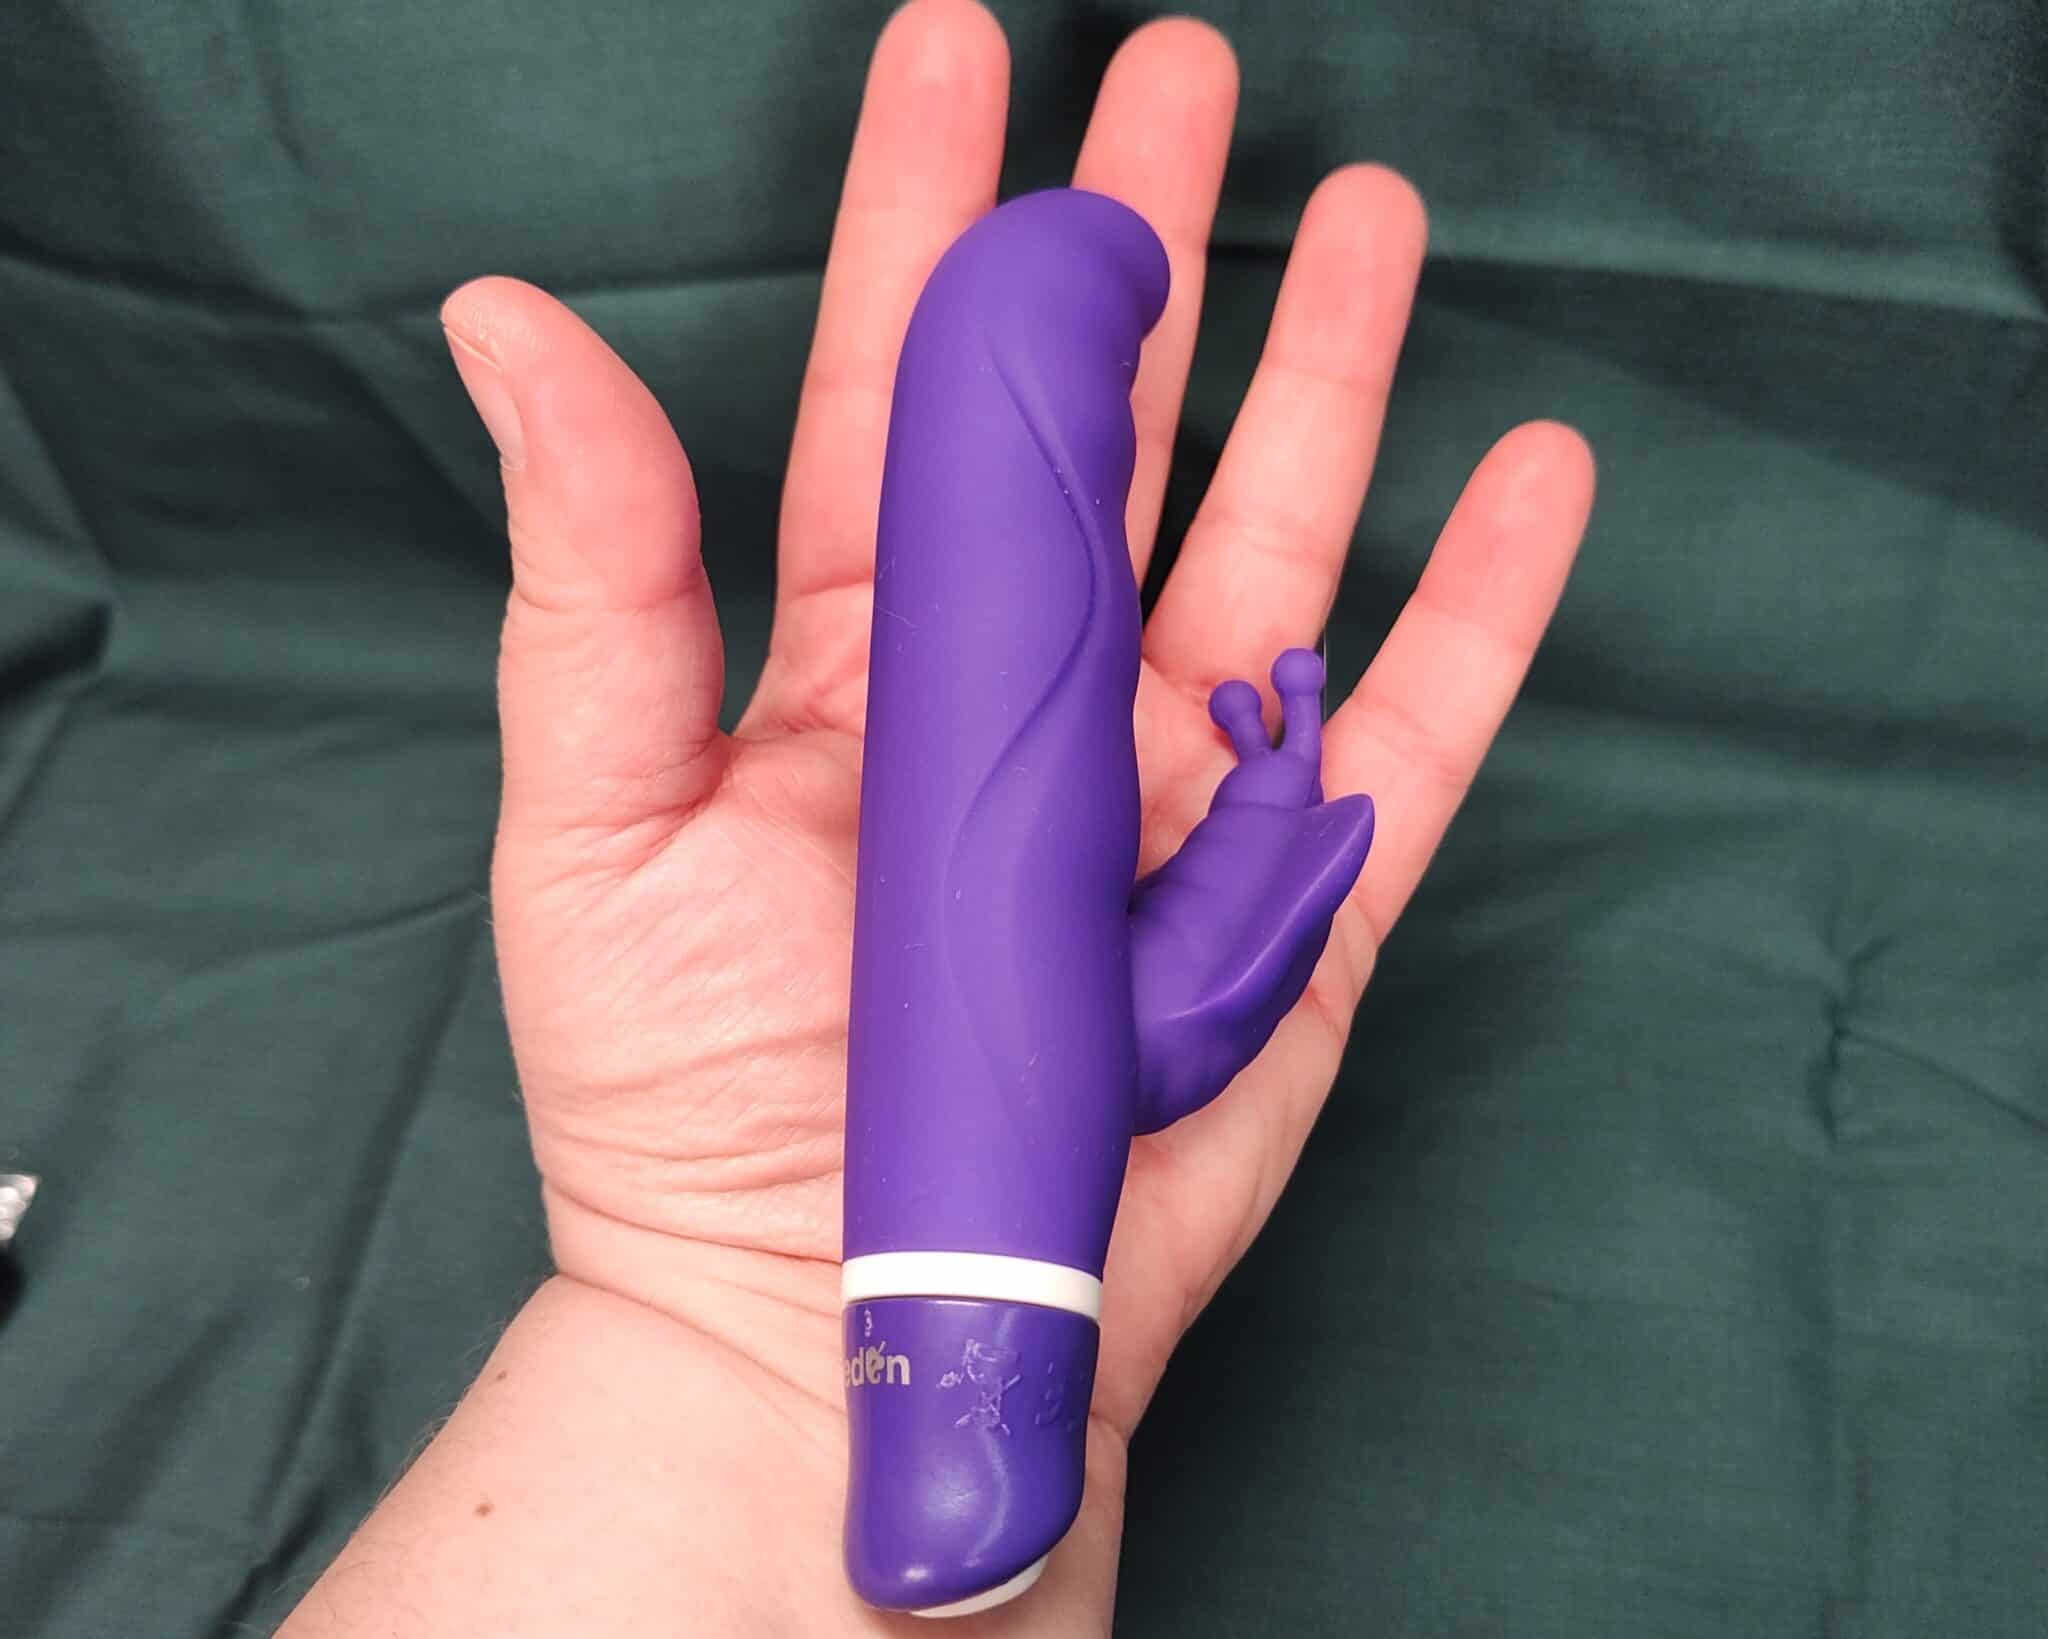 My Personal Experiences with EdenFantasys Butterfly G Rabbit Vibrator